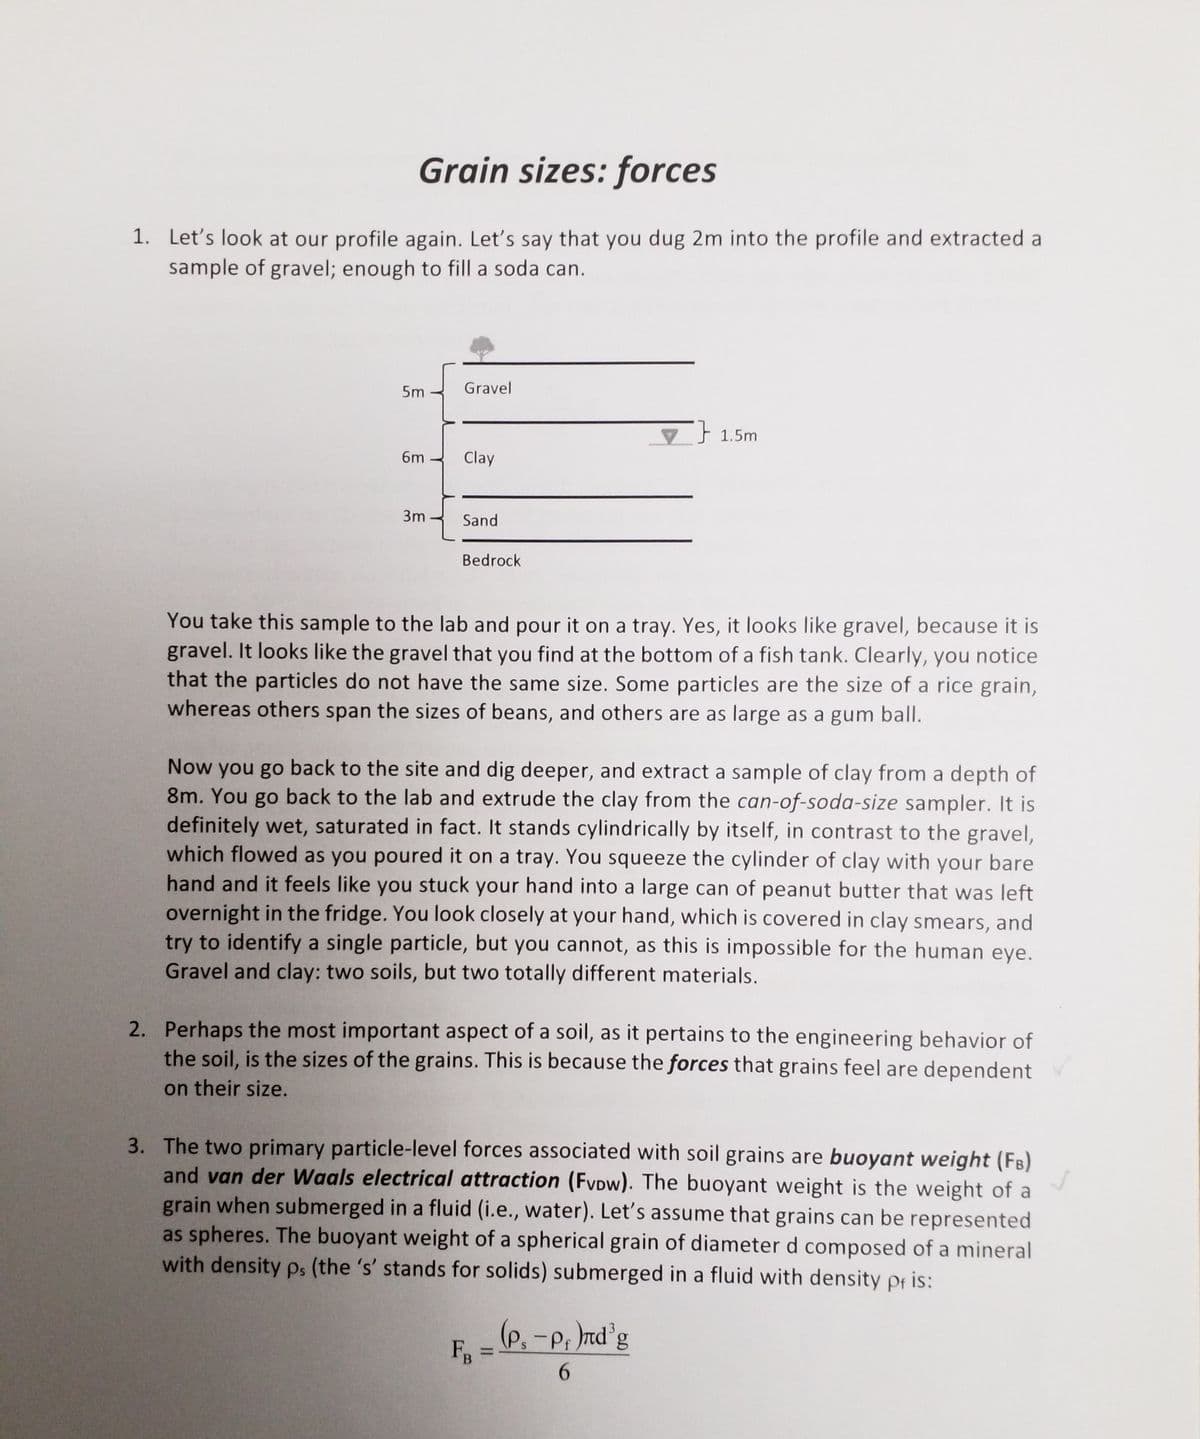 Grain sizes: forces
1. Let's look at our profile again. Let's say that you dug 2m into the profile and extracted a
sample of gravel; enough to fill a soda can.
5m
Gravel
V 1.5m
6m
Clay
3m
Sand
Bedrock
You take this sample to the lab and pour it on a tray. Yes, it looks like gravel, because it is
gravel. It looks like the gravel that you find at the bottom of a fish tank. Clearly, you notice
that the particles do not have the same size. Some particles are the size of a rice grain,
whereas others span the sizes of beans, and others are as large as a gum ball.
Now you go back to the site and dig deeper, and extract a sample of clay from a depth of
8m. You go back to the lab and extrude the clay from the can-of-soda-size sampler. It is
definitely wet, saturated in fact. It stands cylindrically by itself, in contrast to the gravel,
which flowed as you poured it on a tray. You squeeze the cylinder of clay with your bare
hand and it feels like you stuck your hand into a large can of peanut butter that was left
overnight in the fridge. You look closely at your hand, which is covered in clay smears, and
try to identify a single particle, but you cannot, as this is impossible for the human eye.
Gravel and clay: two soils, but two totally different materials.
2. Perhaps the most important aspect of a soil, as it pertains to the engineering behavior of
the soil, is the sizes of the grains. This is because the forces that grains feel are dependent
on their size.
3. The two primary particle-level forces associated with soil grains are buoyant weight (FB)
and van der Waals electrical attraction (FvDw). The buoyant weight is the weight of a
grain when submerged in a fluid (i.e., water). Let's assume that grains can be represented
as spheres. The buoyant weight of a spherical grain of diameter d composed of a mineral
with density ps (the 's' stands for solids) submerged in a fluid with density pf is:
(p,-p, nd'g
S
%3D
6.
